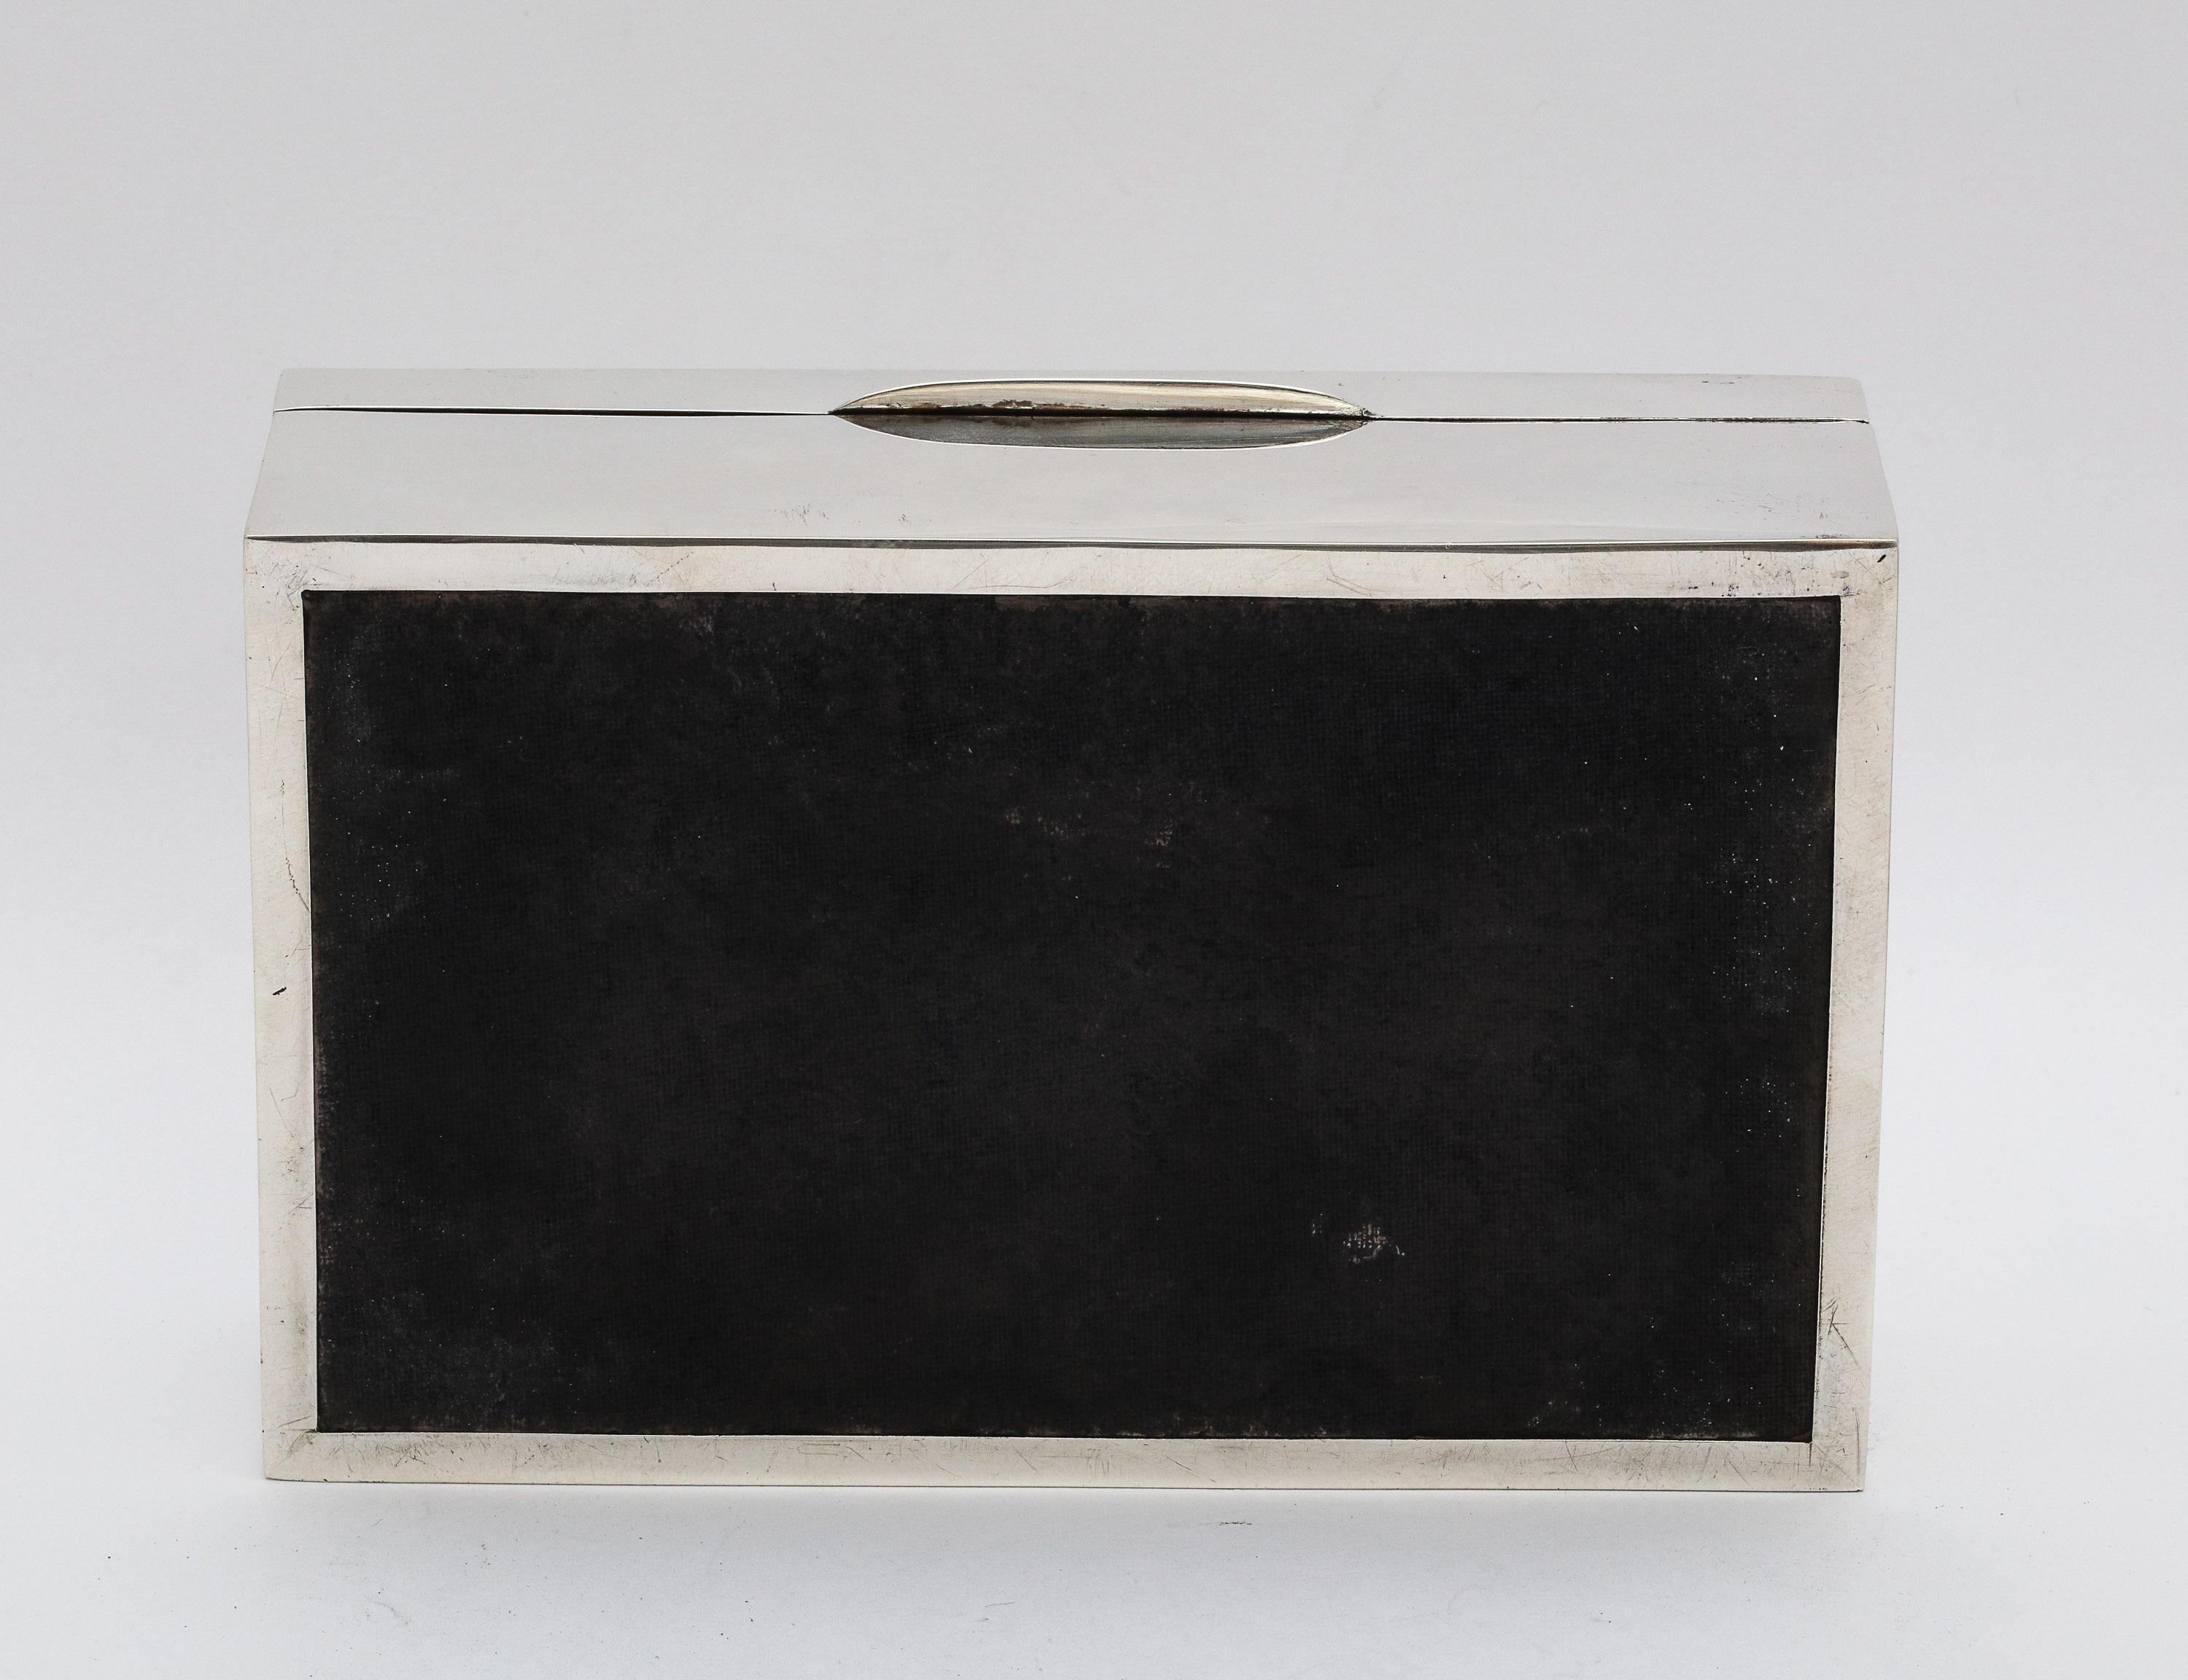 Edwardian Sterling Silver Table Box with Hinged Lid 12